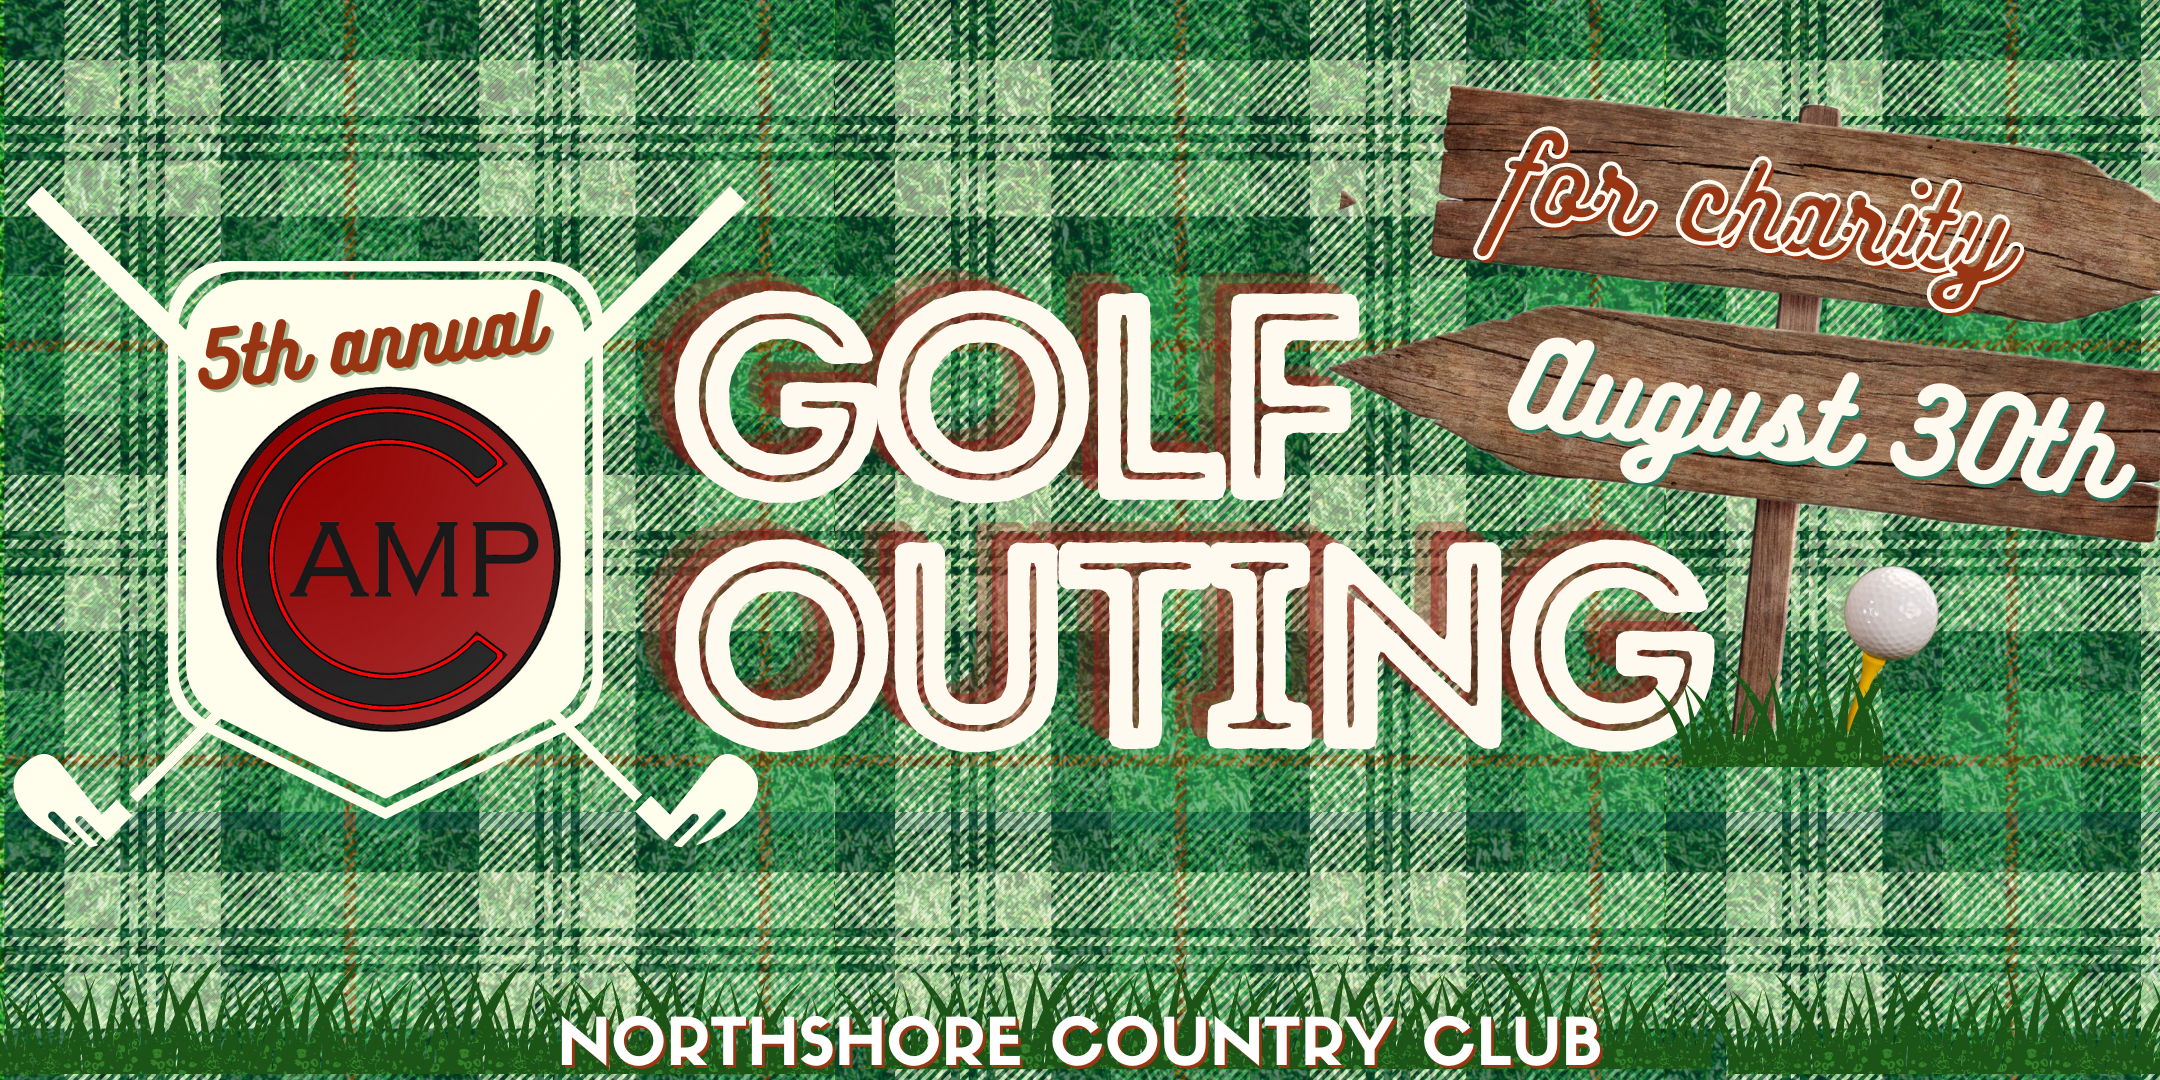 5th Annual Camp Golf Outing - SPONSOR